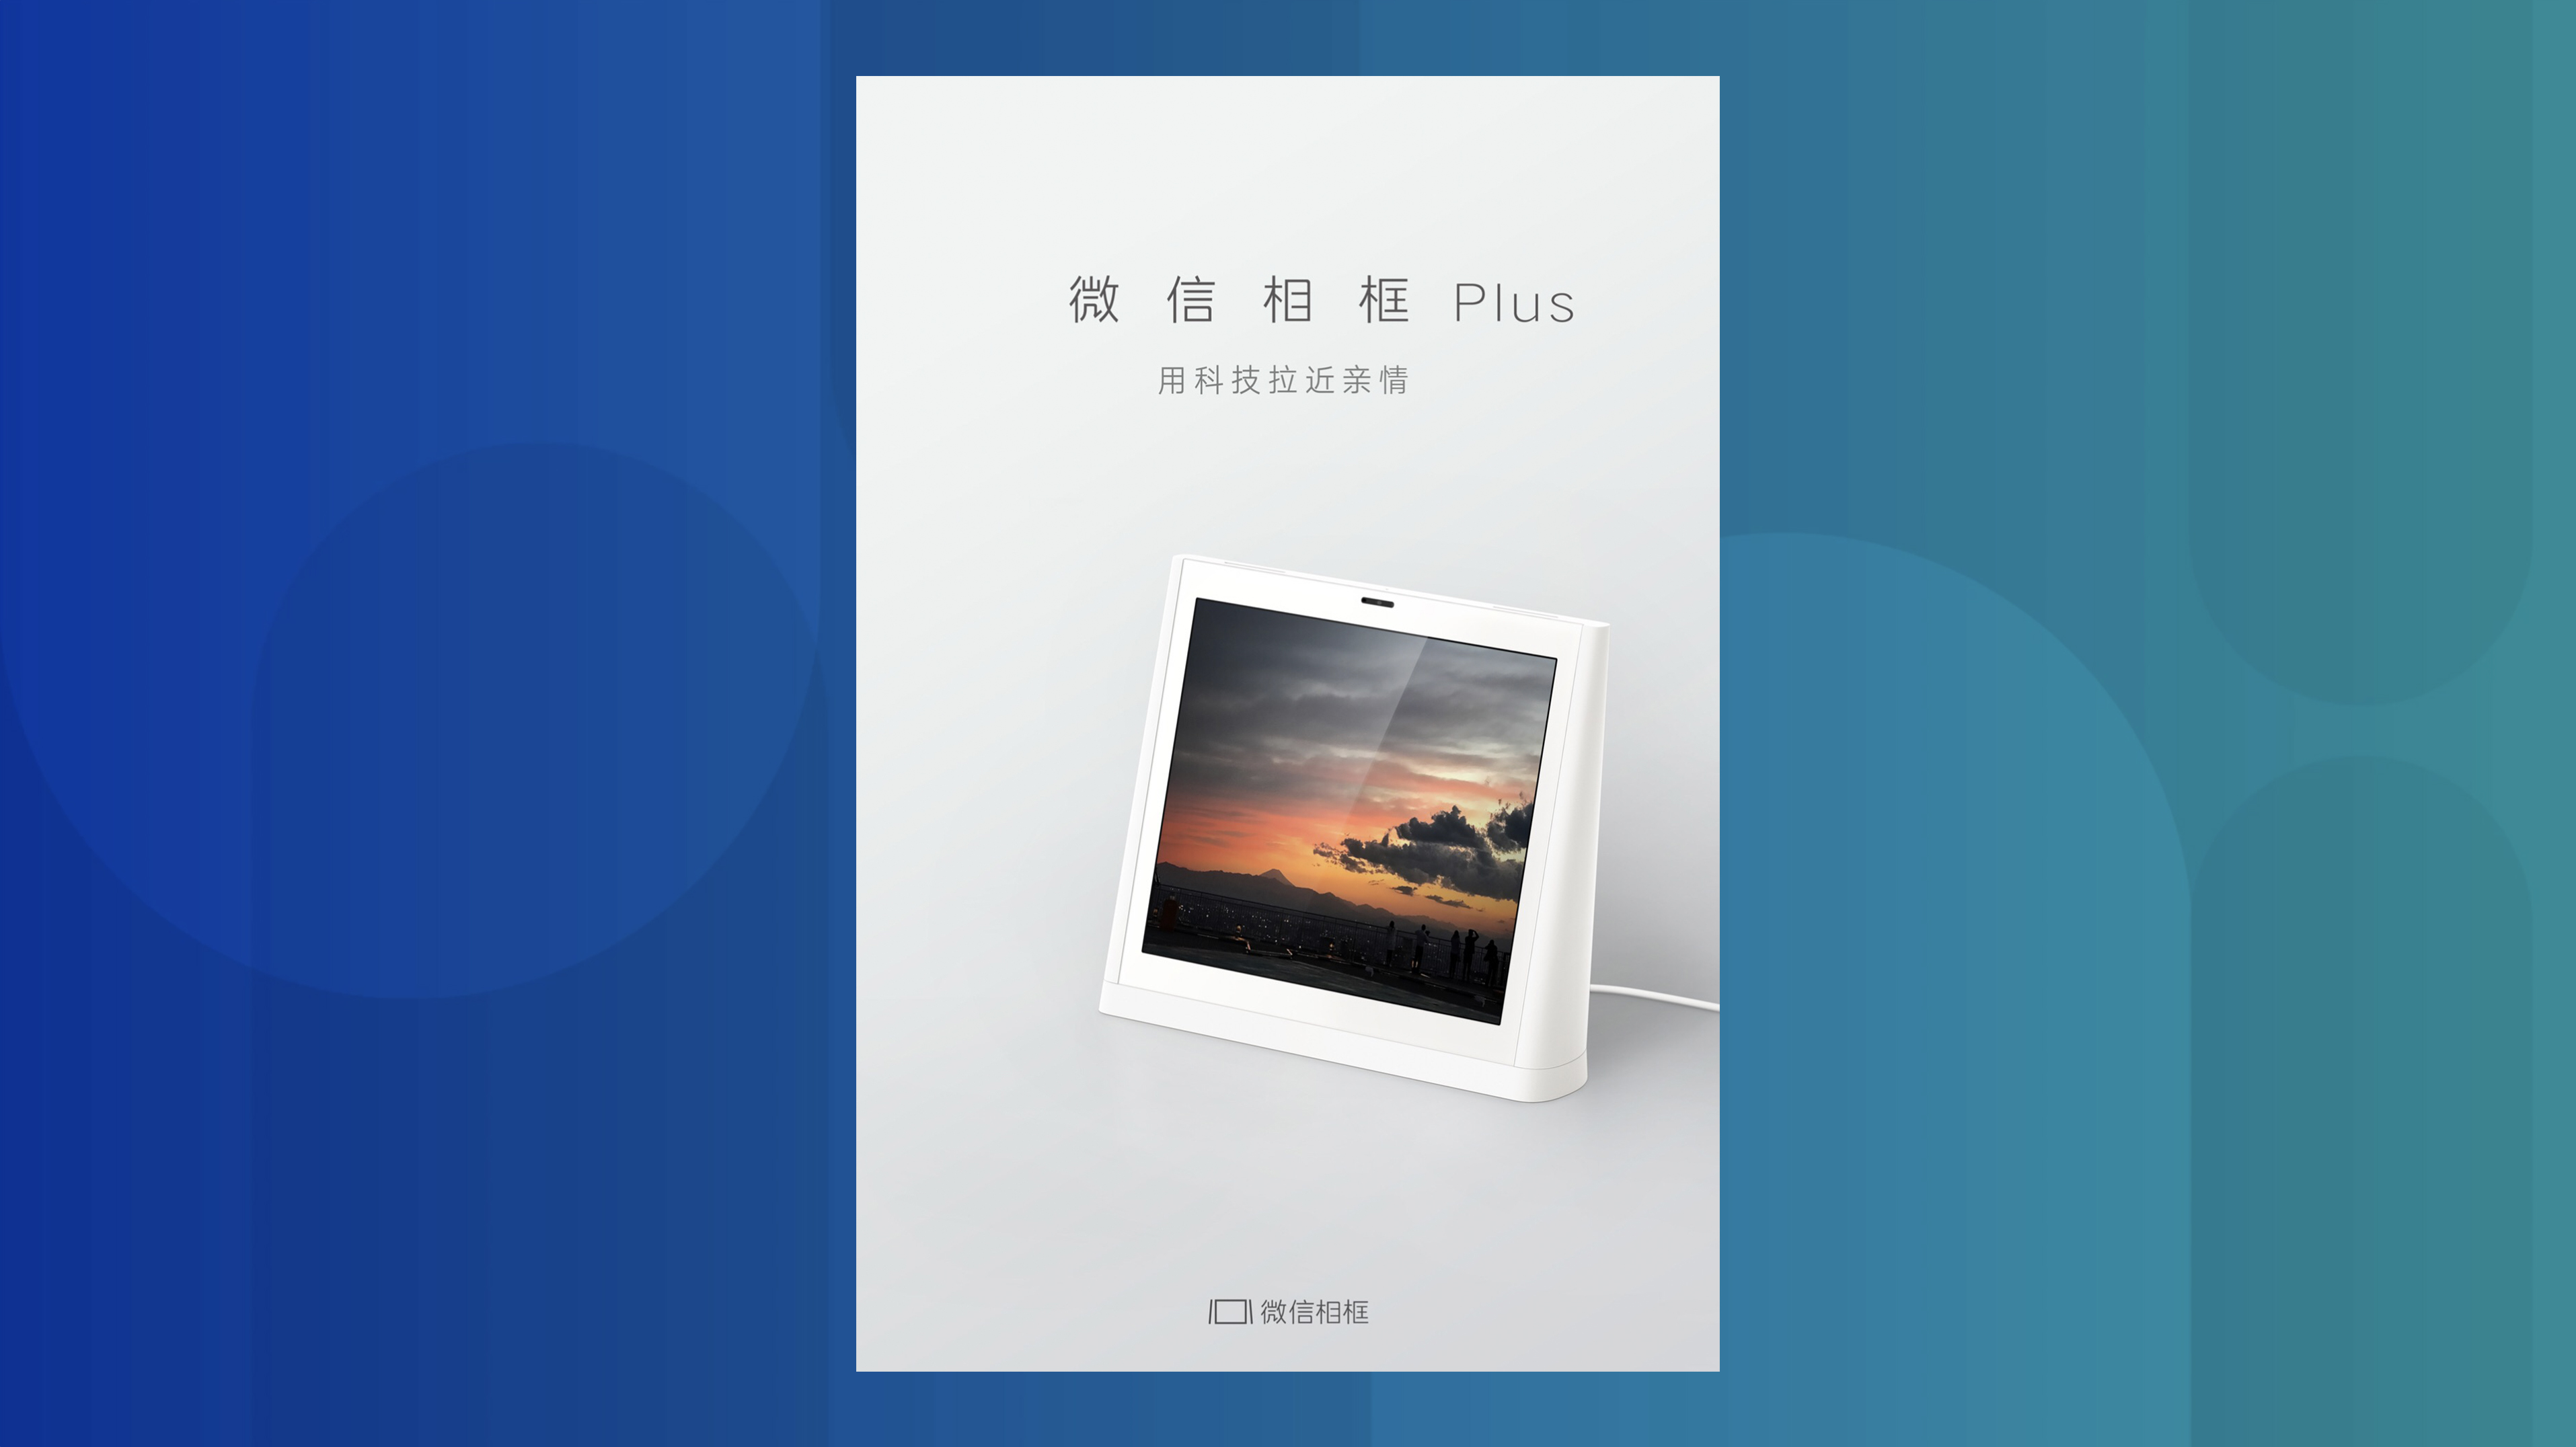 Many people say they’d prefer a tablet for over US$200. (Picture: Tencent)